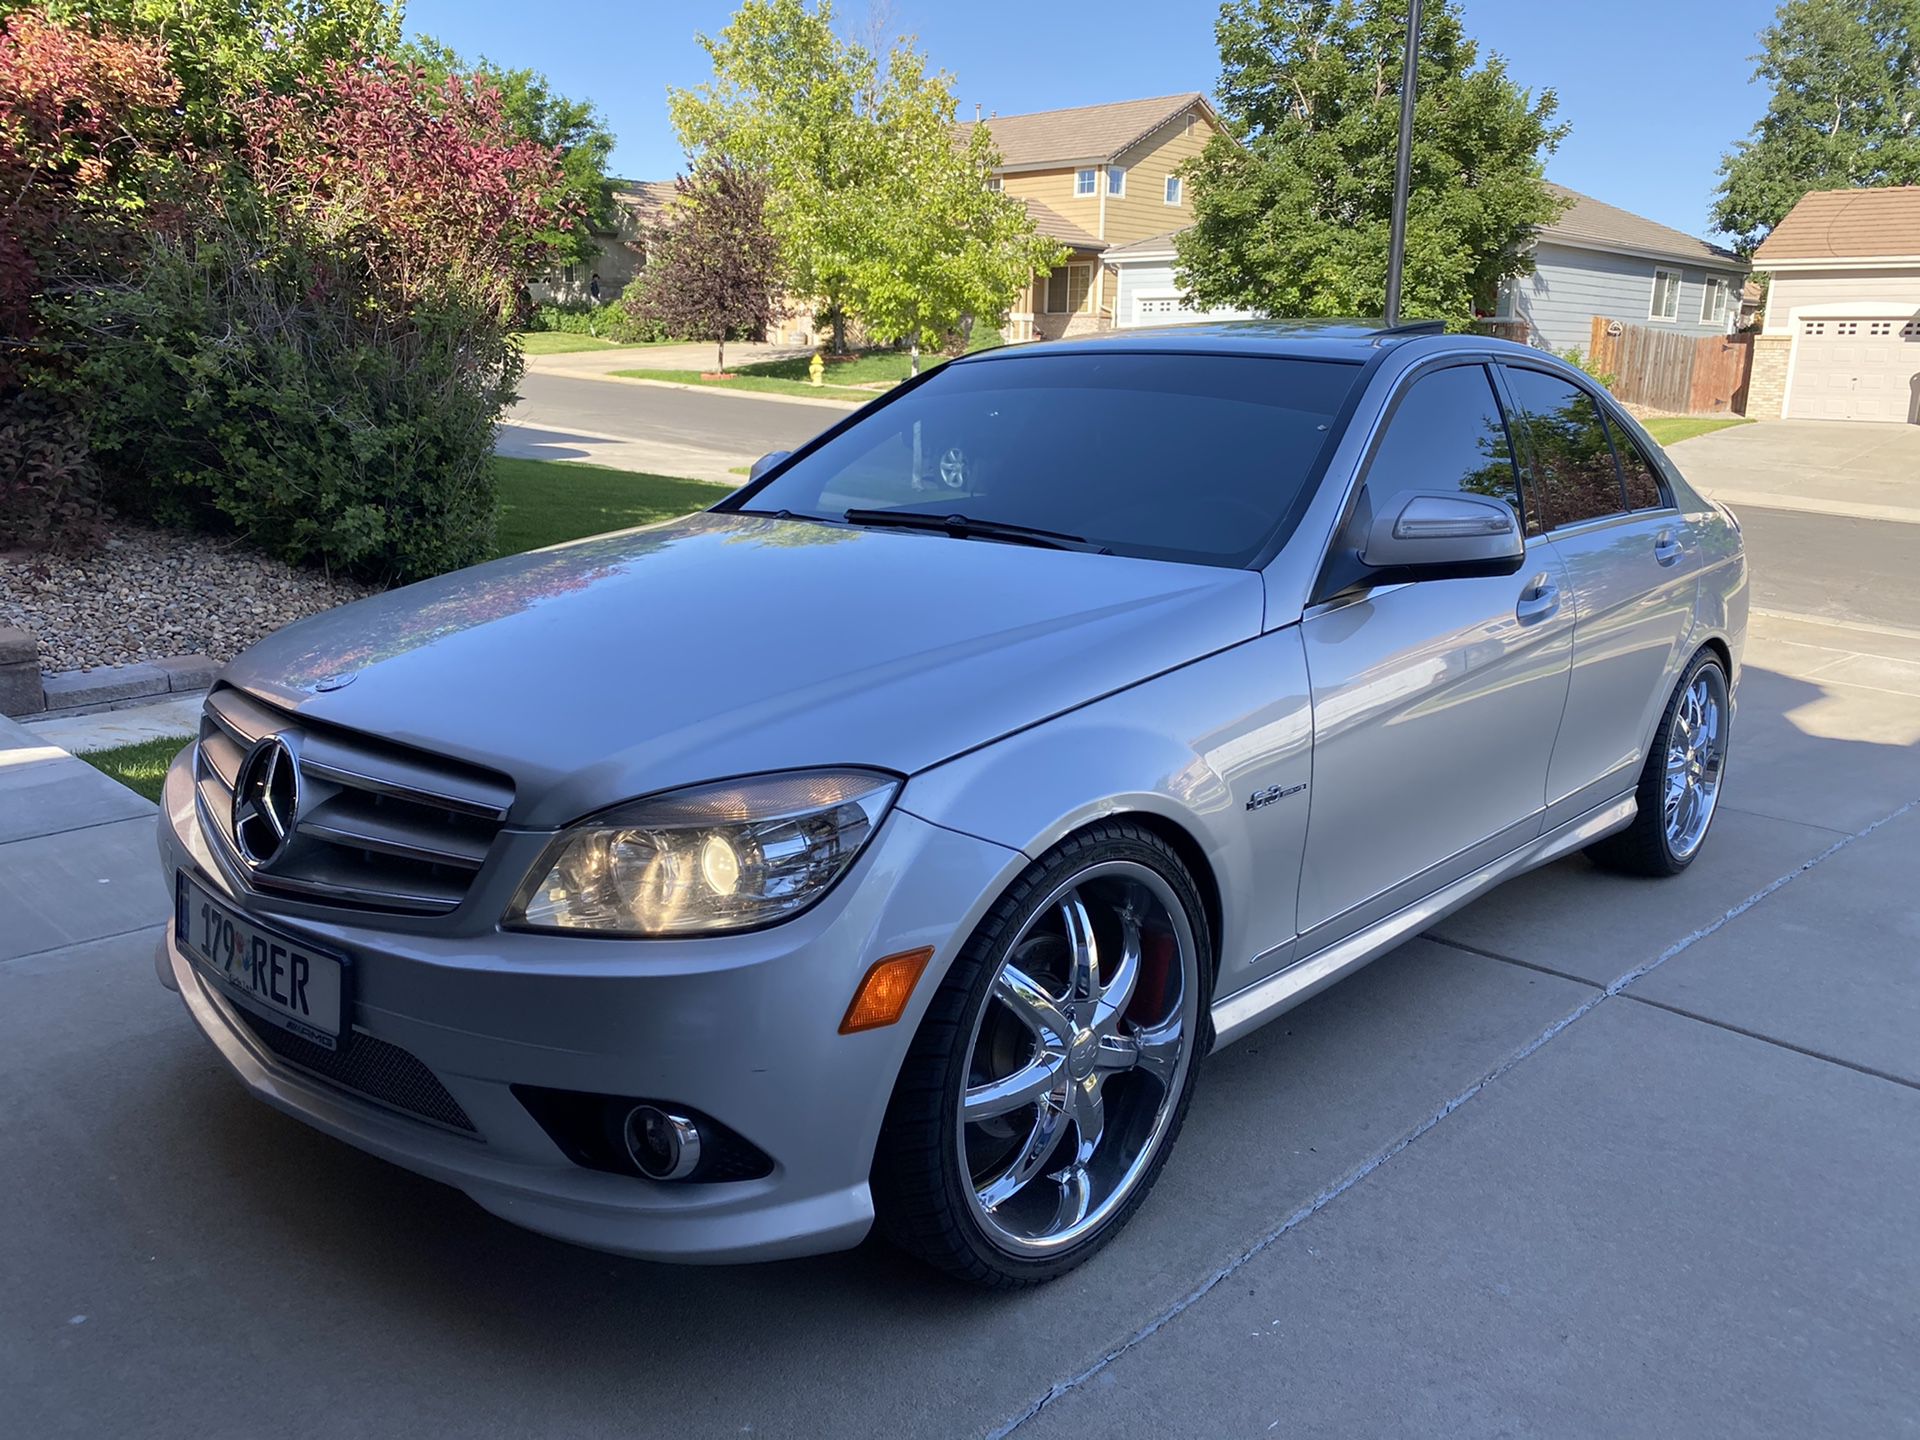 2009 Mercedes C63 AMG 138,000 miles Very well-maintained always garaged and covered AMG rear window spoiler and AMG trunk spoiler staggered 20" rim